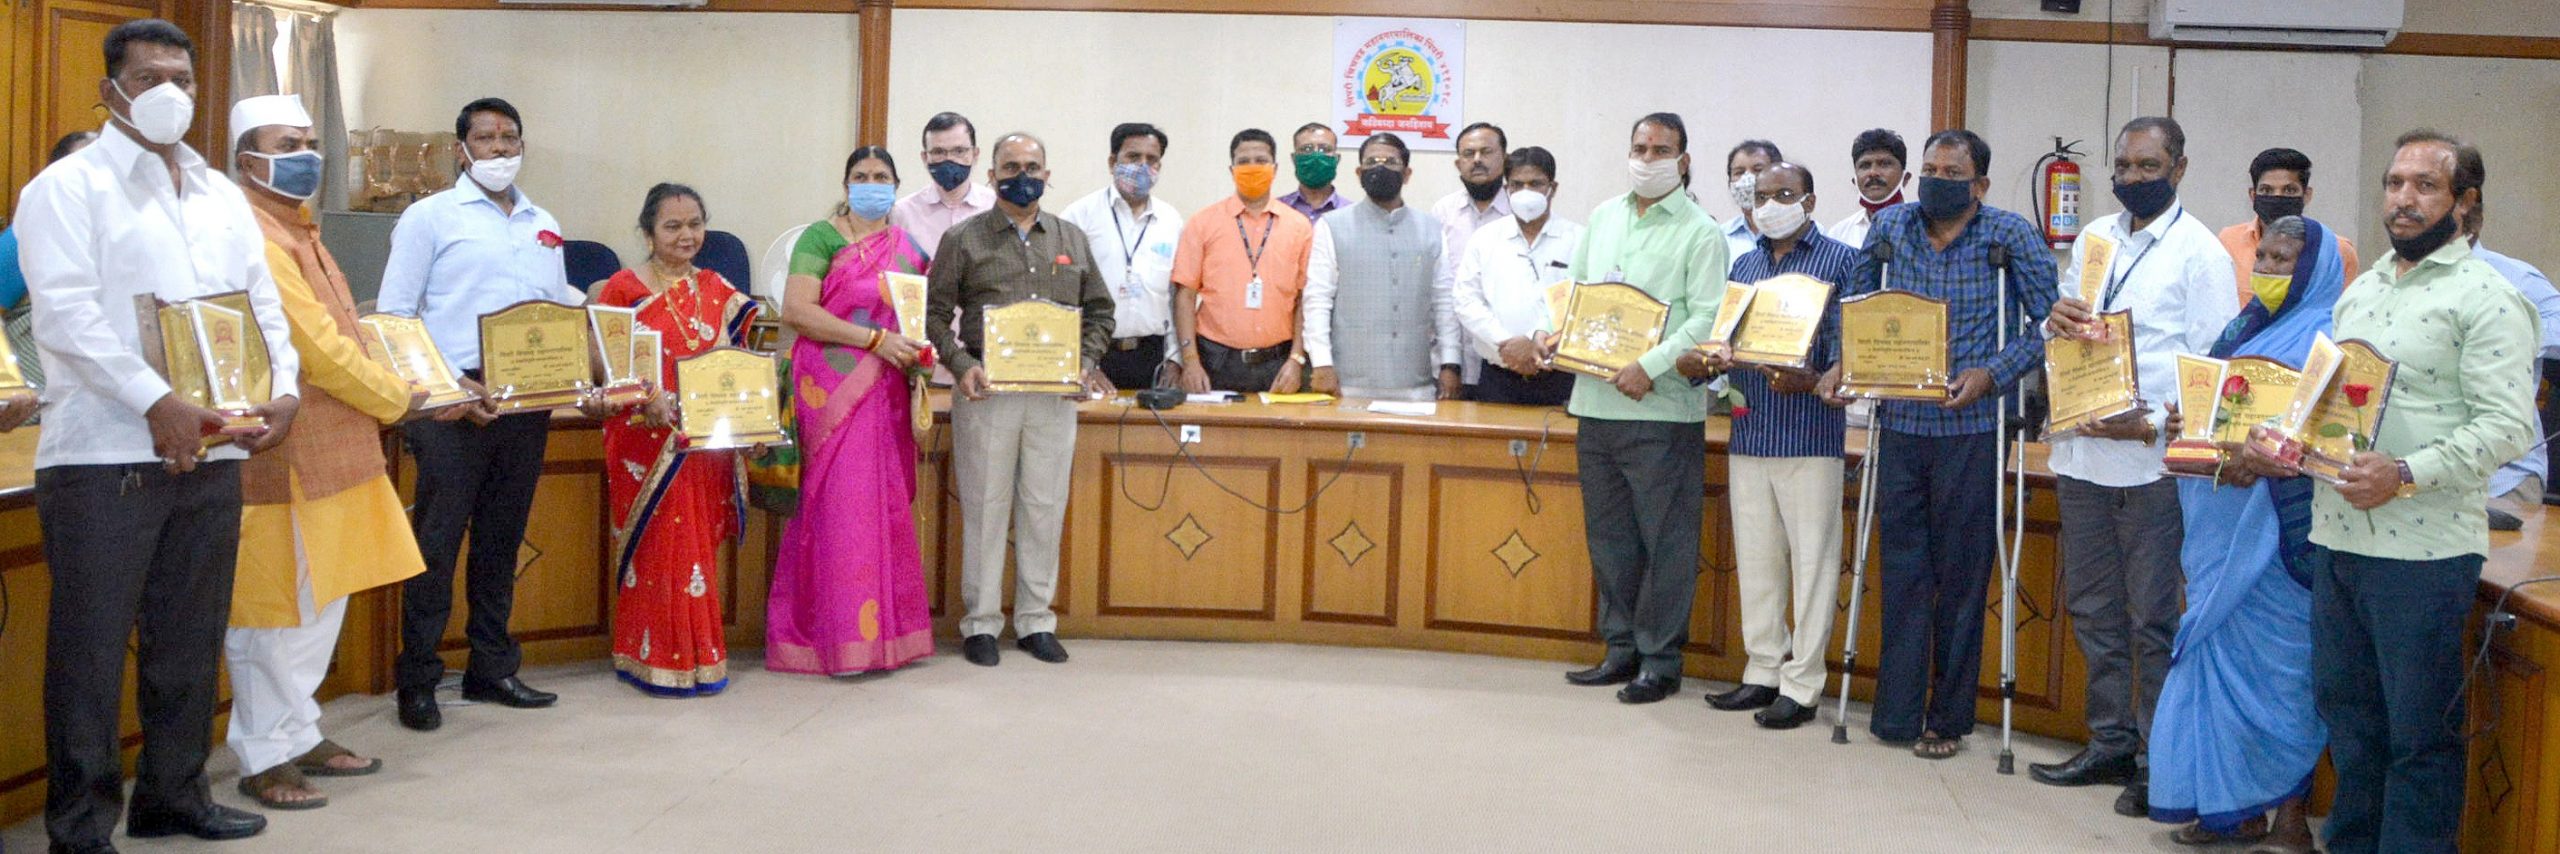 15 officers and employees of Pimpri Chichwad Municipal Corporation retired